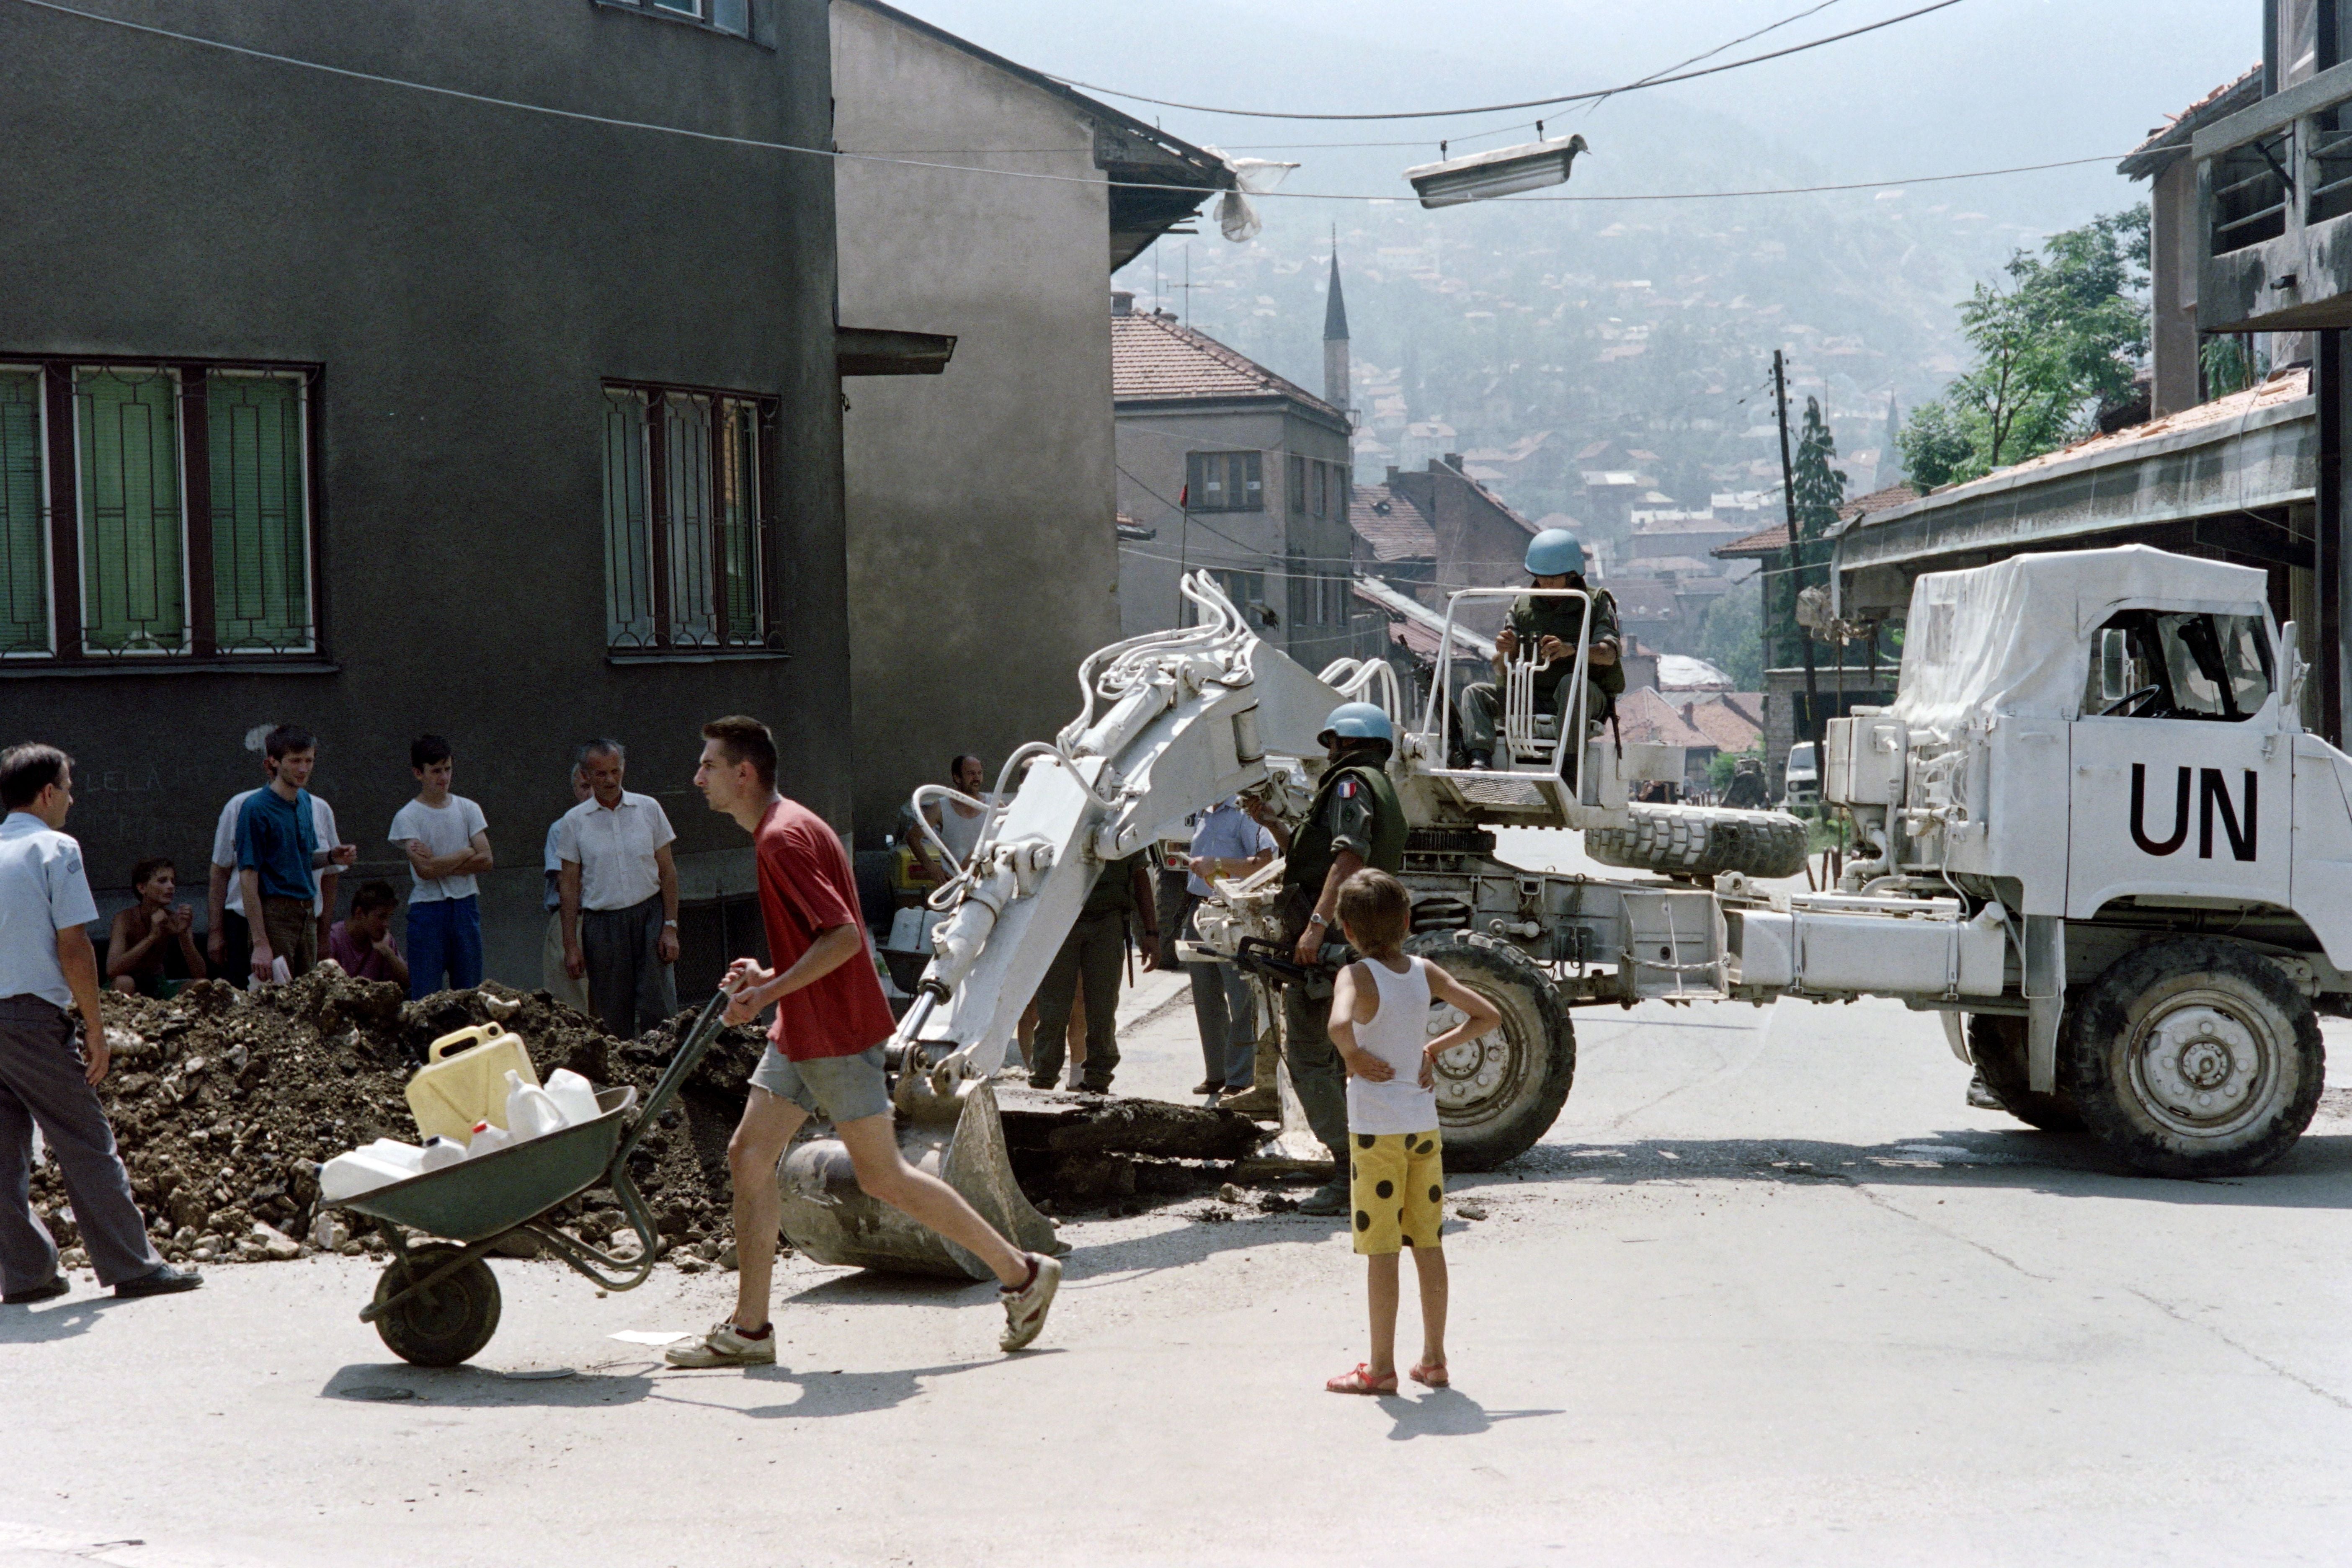 A man carrying jerrycans passes by a UN bulldozer in the streets of Sarajevo during the Bosnian war